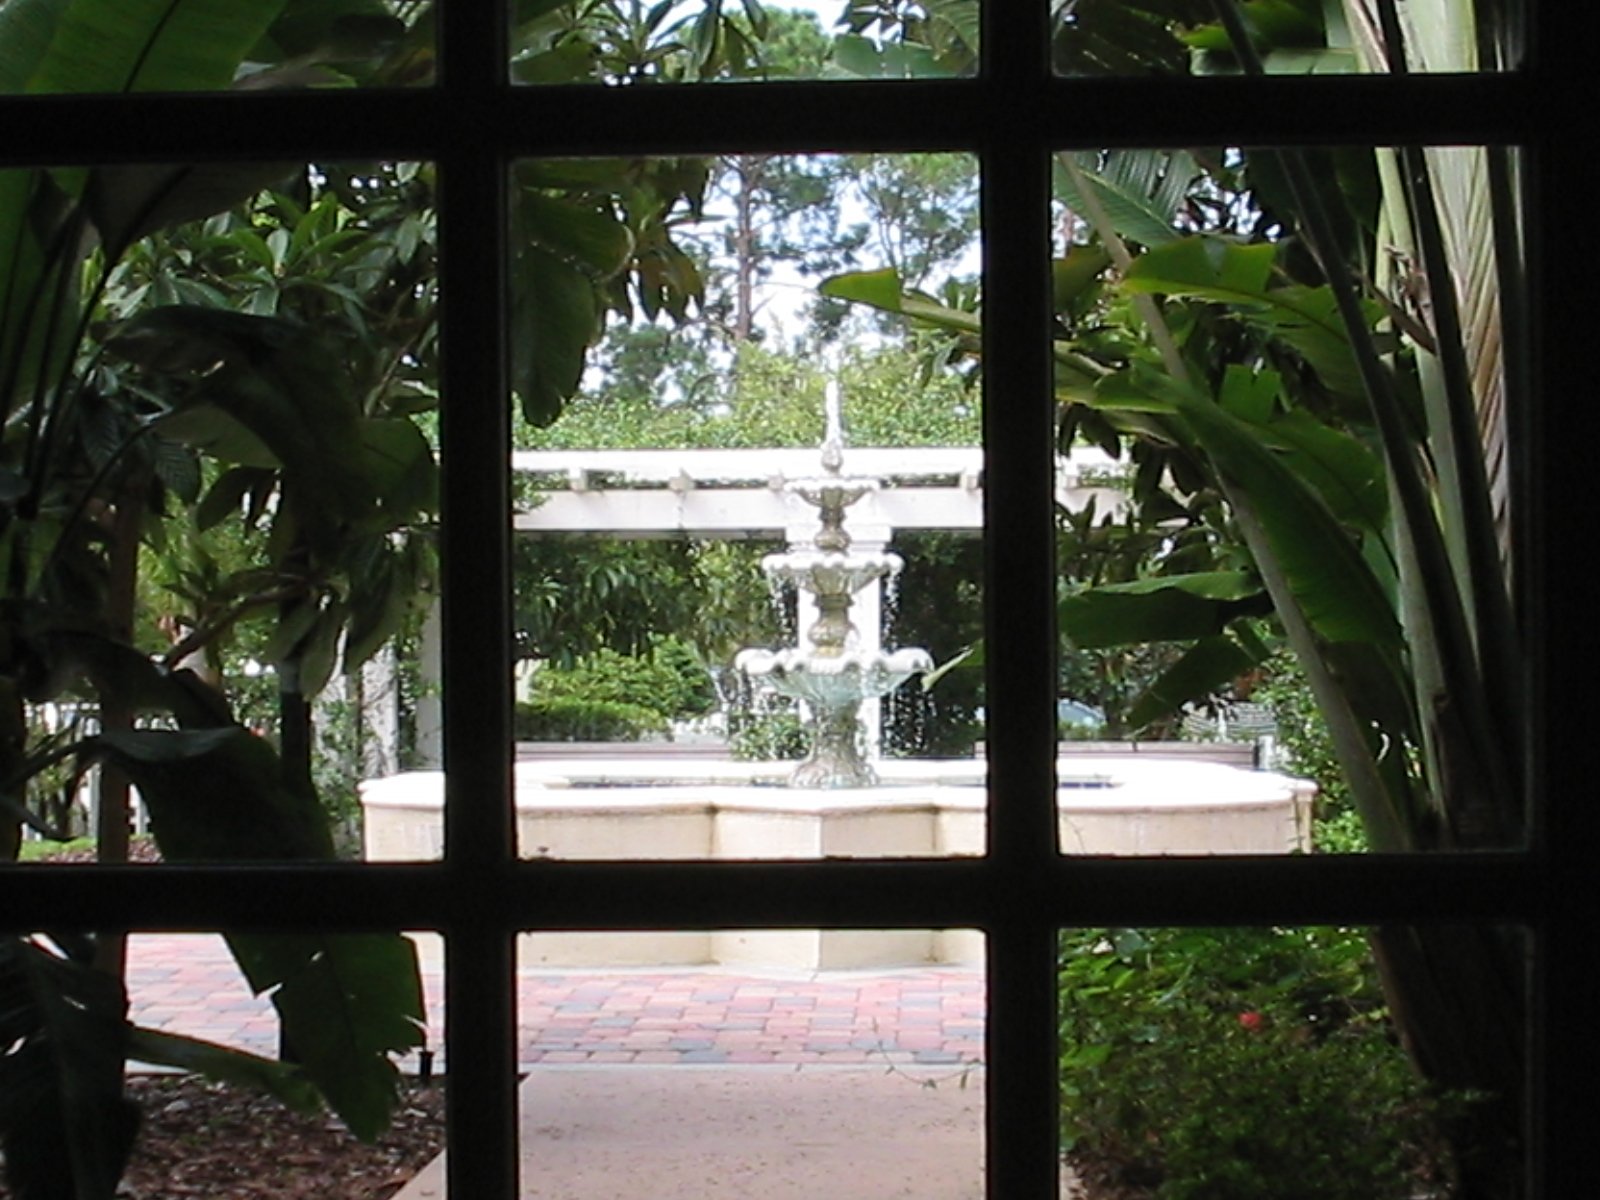 looking through windows to a park with fountains